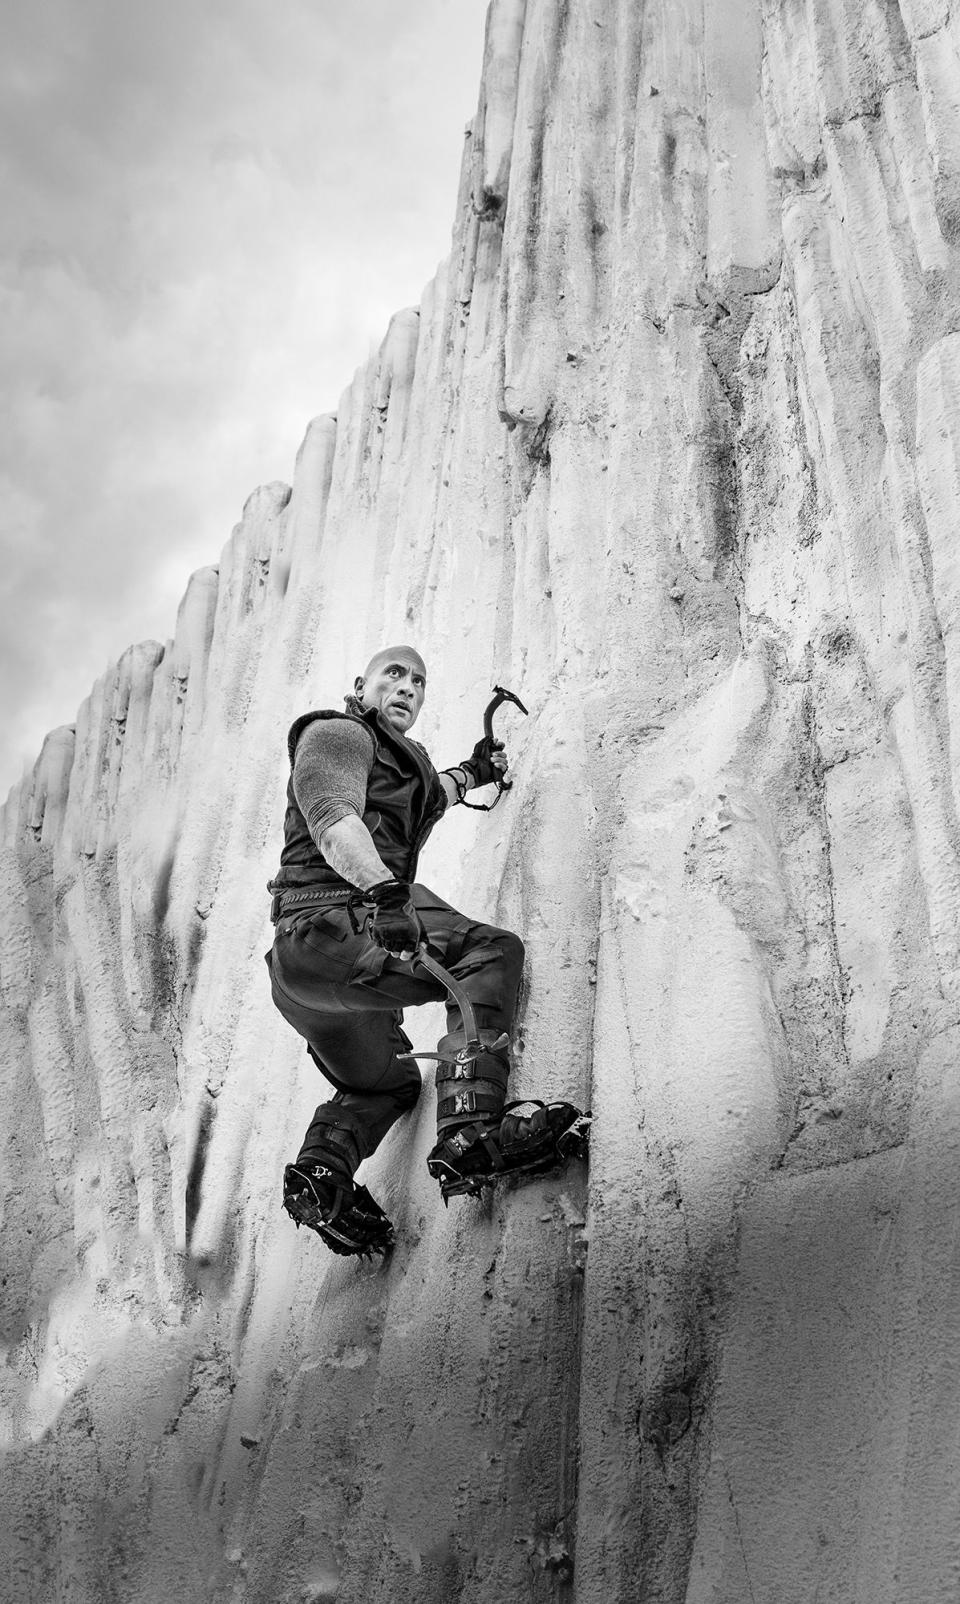 The Rock—On Ice!